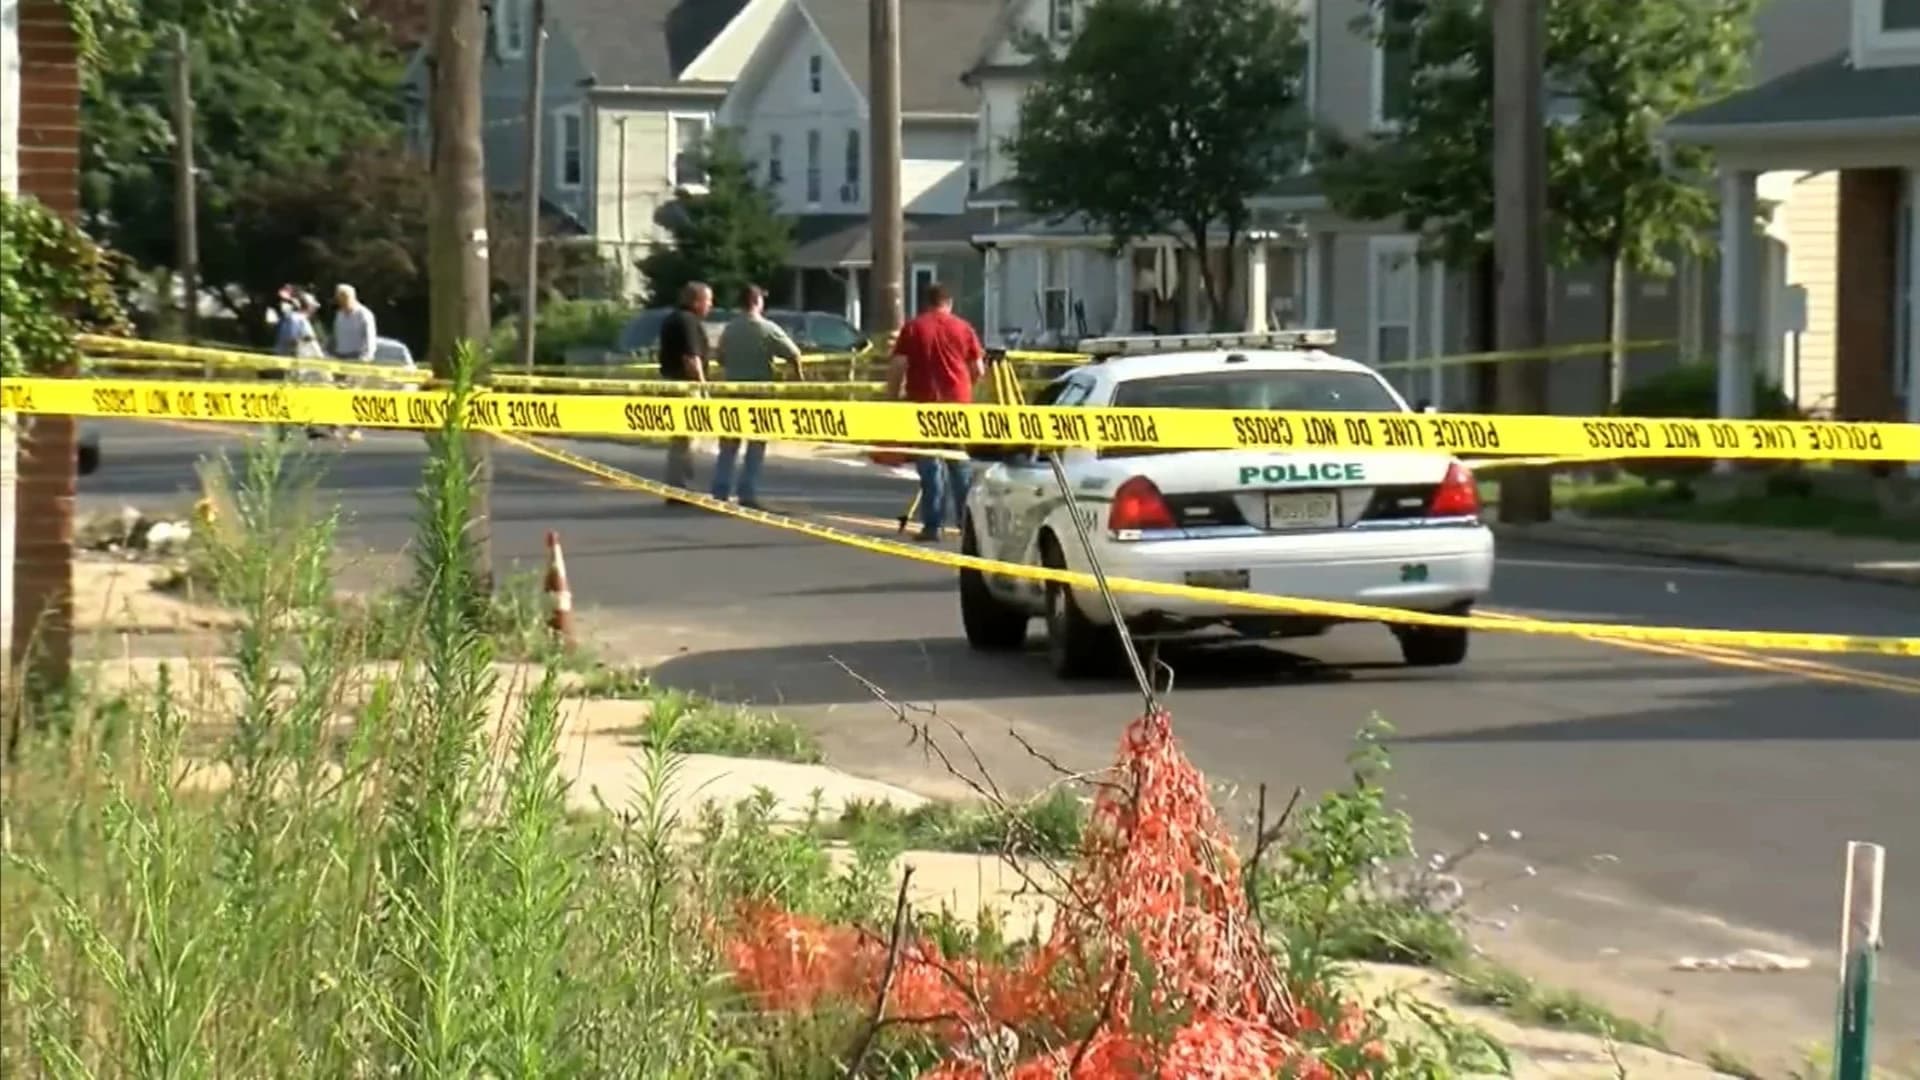 Authorities identify man fatally shot in Long Branch